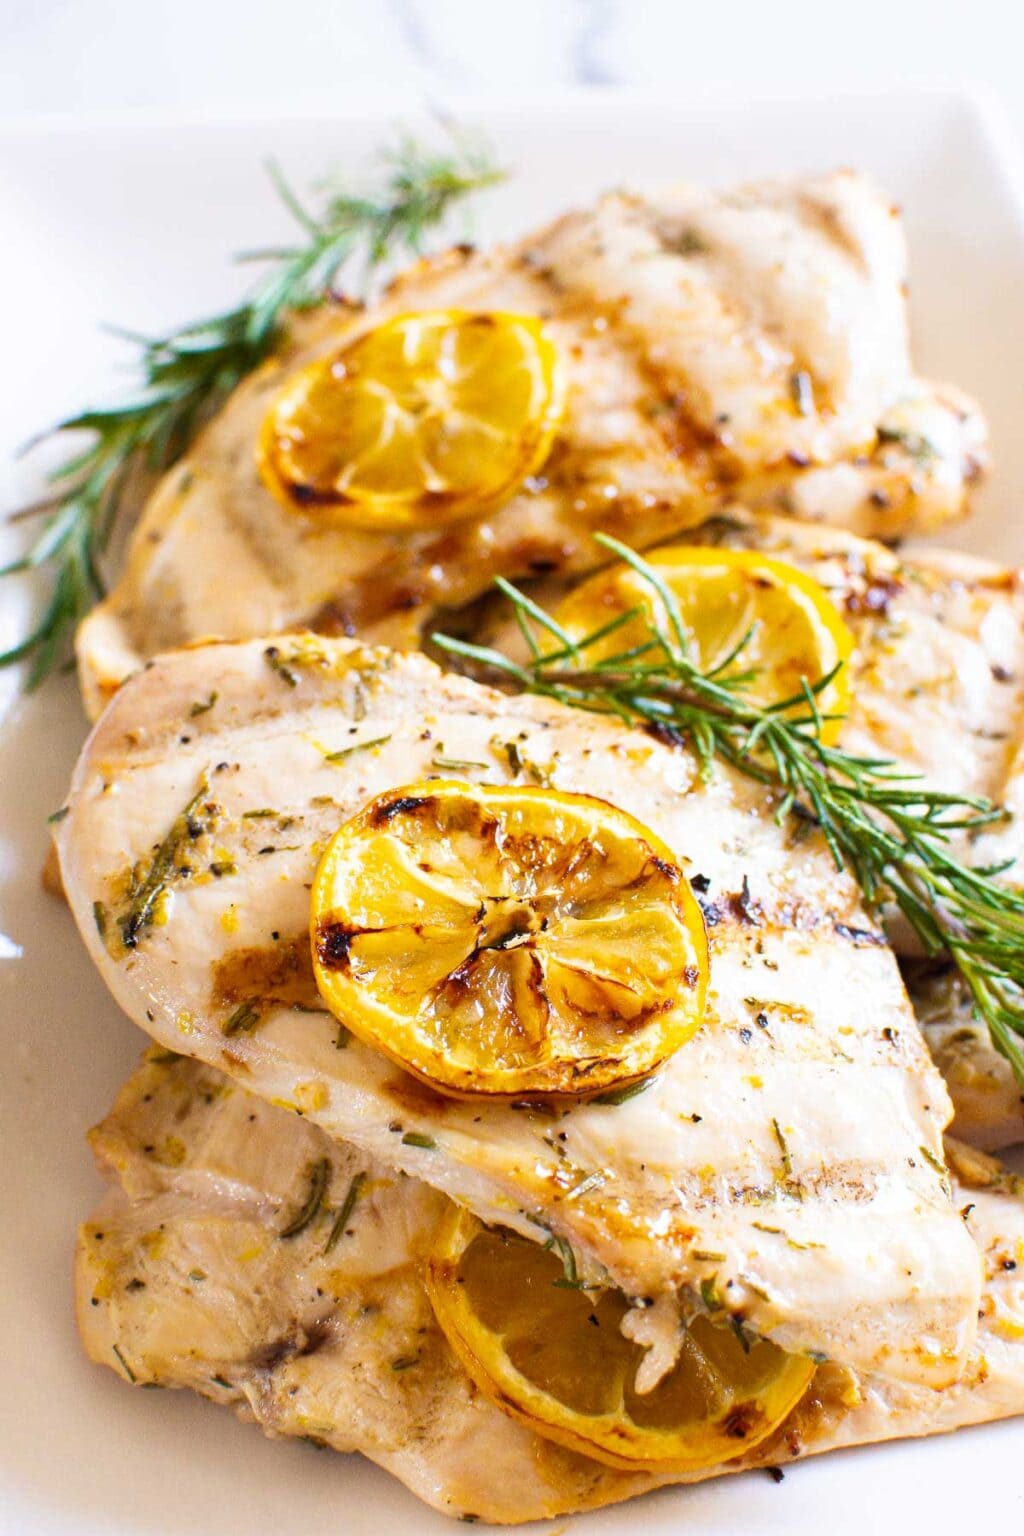 Grilled Chicken Cutlets With Rosemary, Garlic, and Lemon Recipe - Chicken Cutlet Recipes